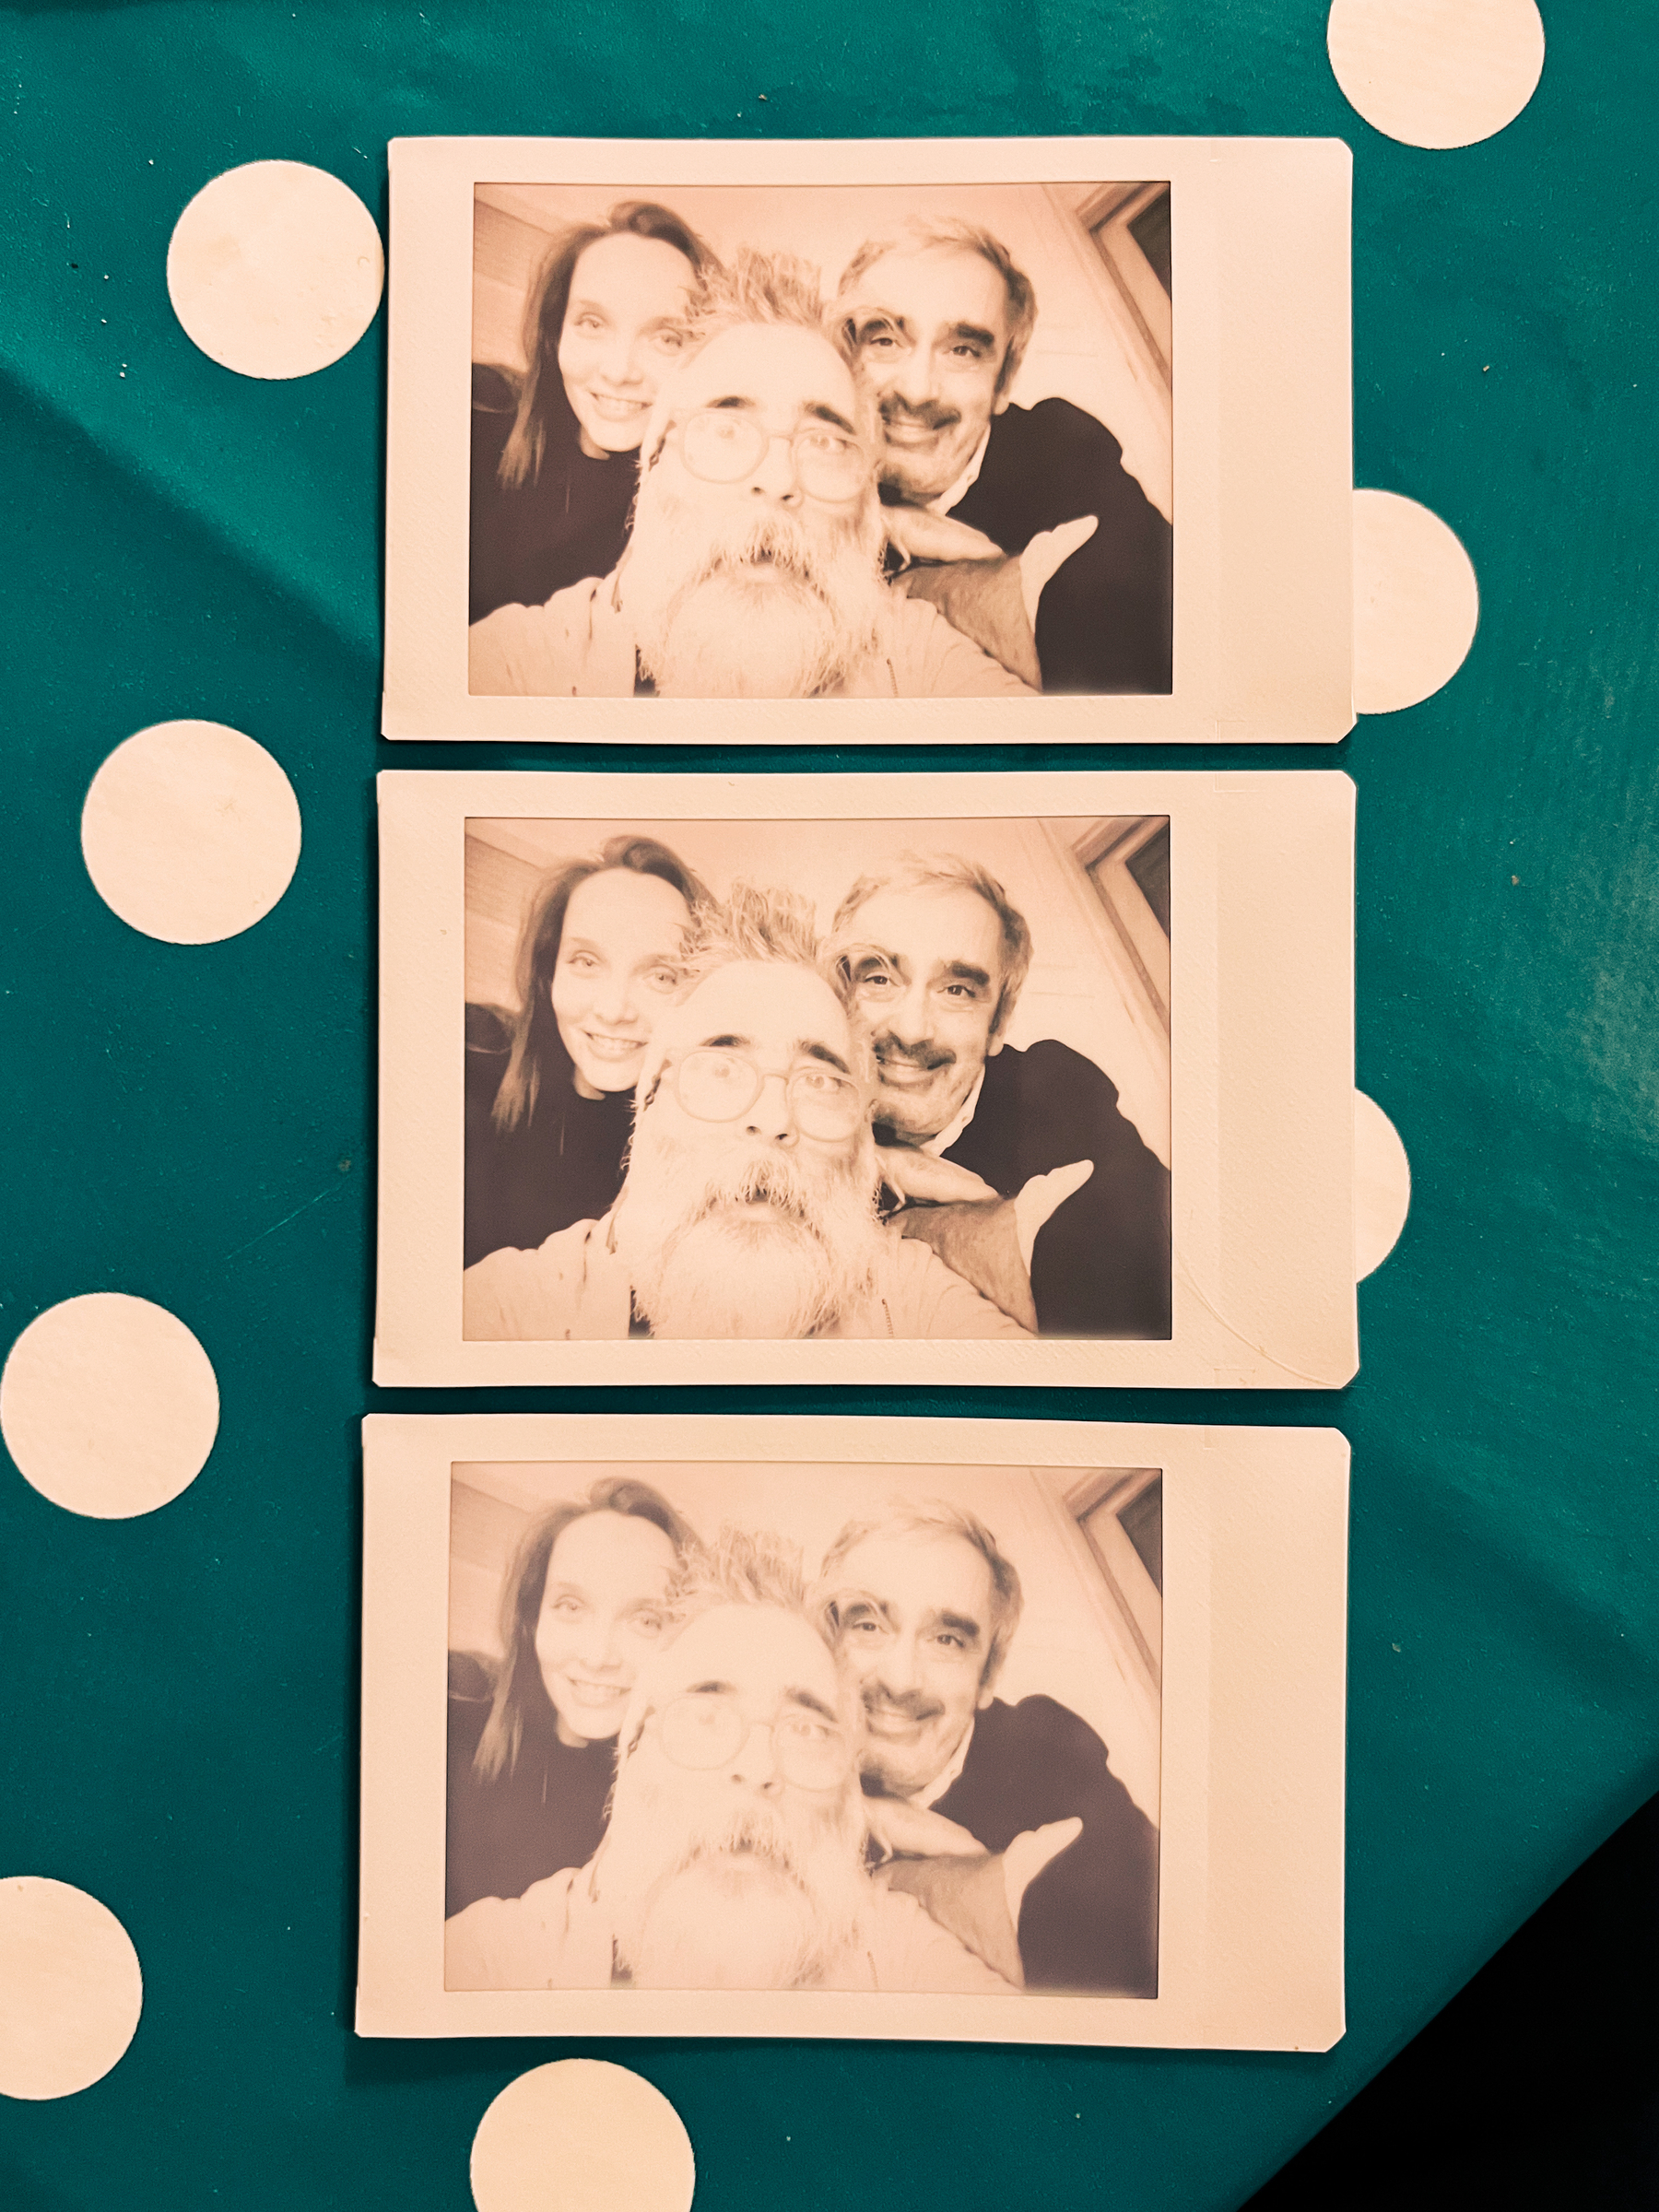 Three Polaroid photos positioned on a green surface with white dots, each showing the same three smiling people posing closely together for a selfie.